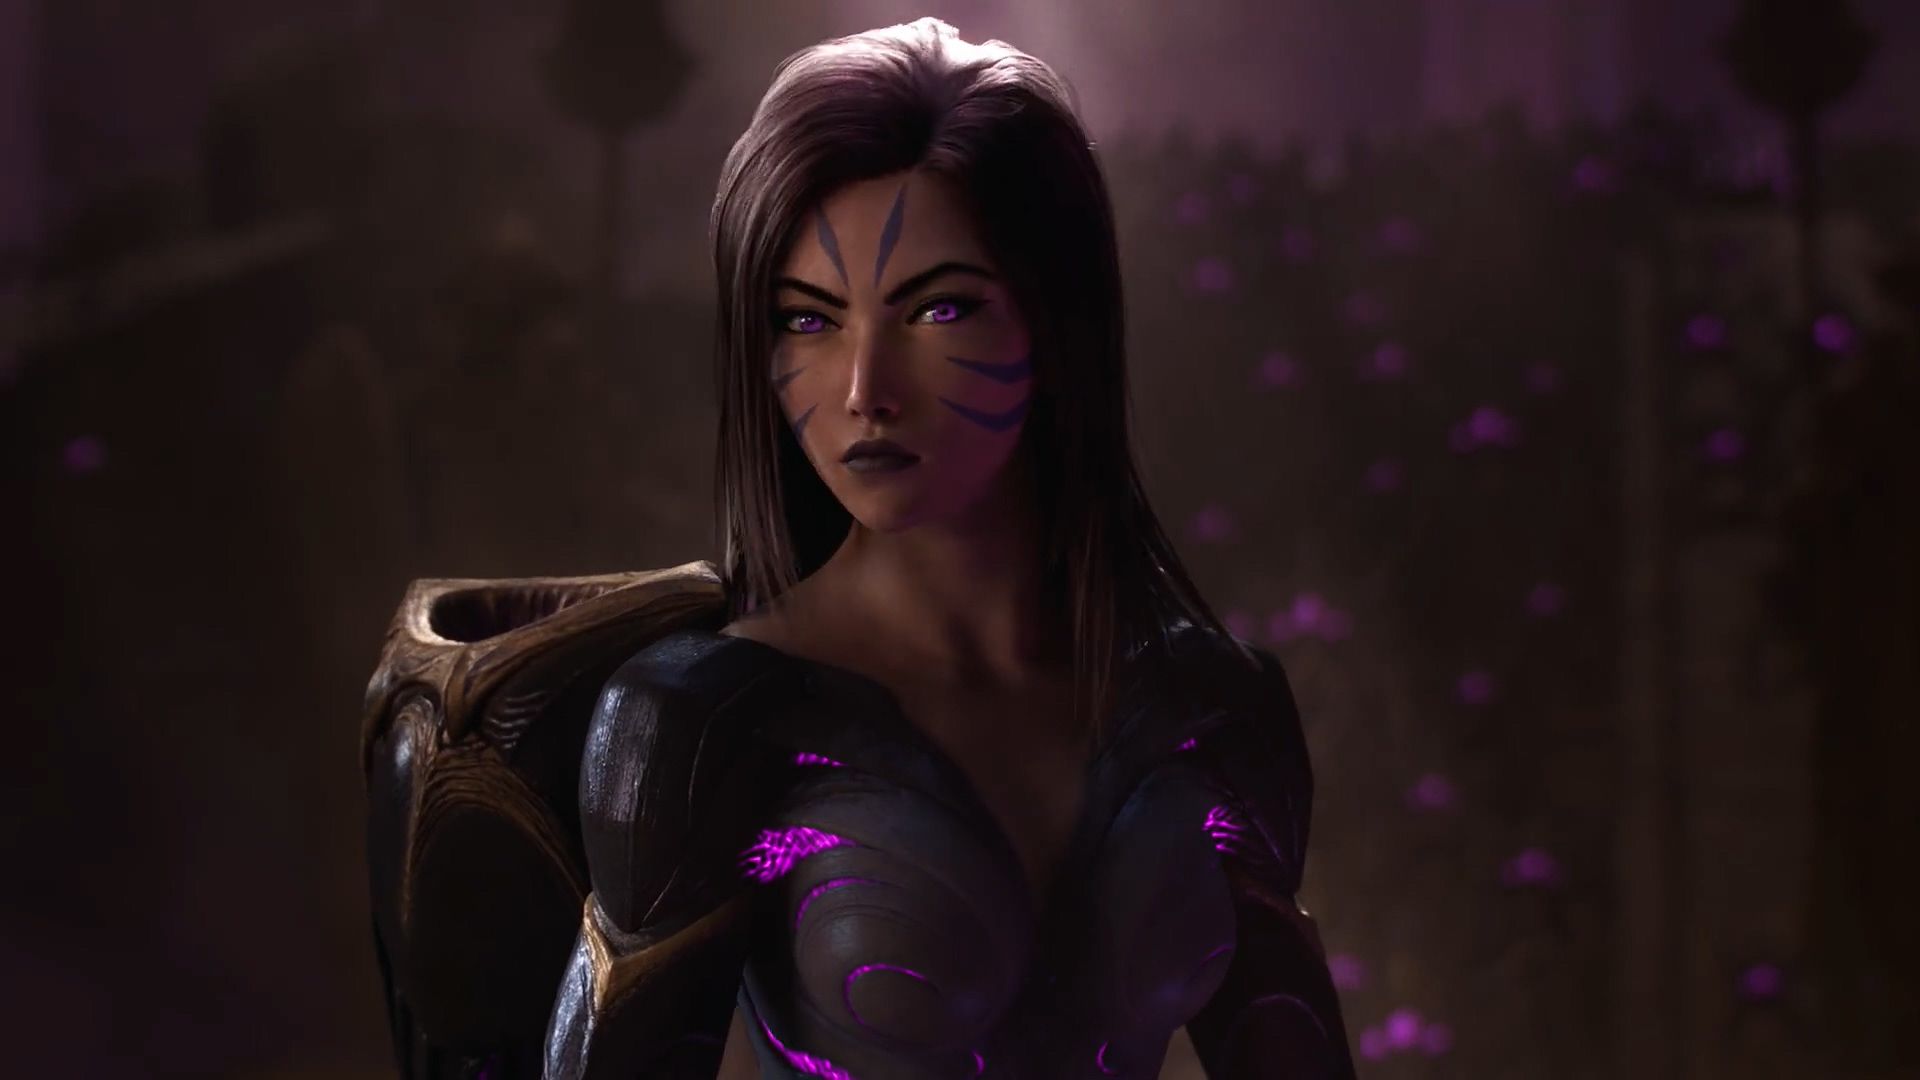 Warriors | Season 2020 Cinematic (wallpapers from animated music video): League of Legends (Picture by Riot Games)